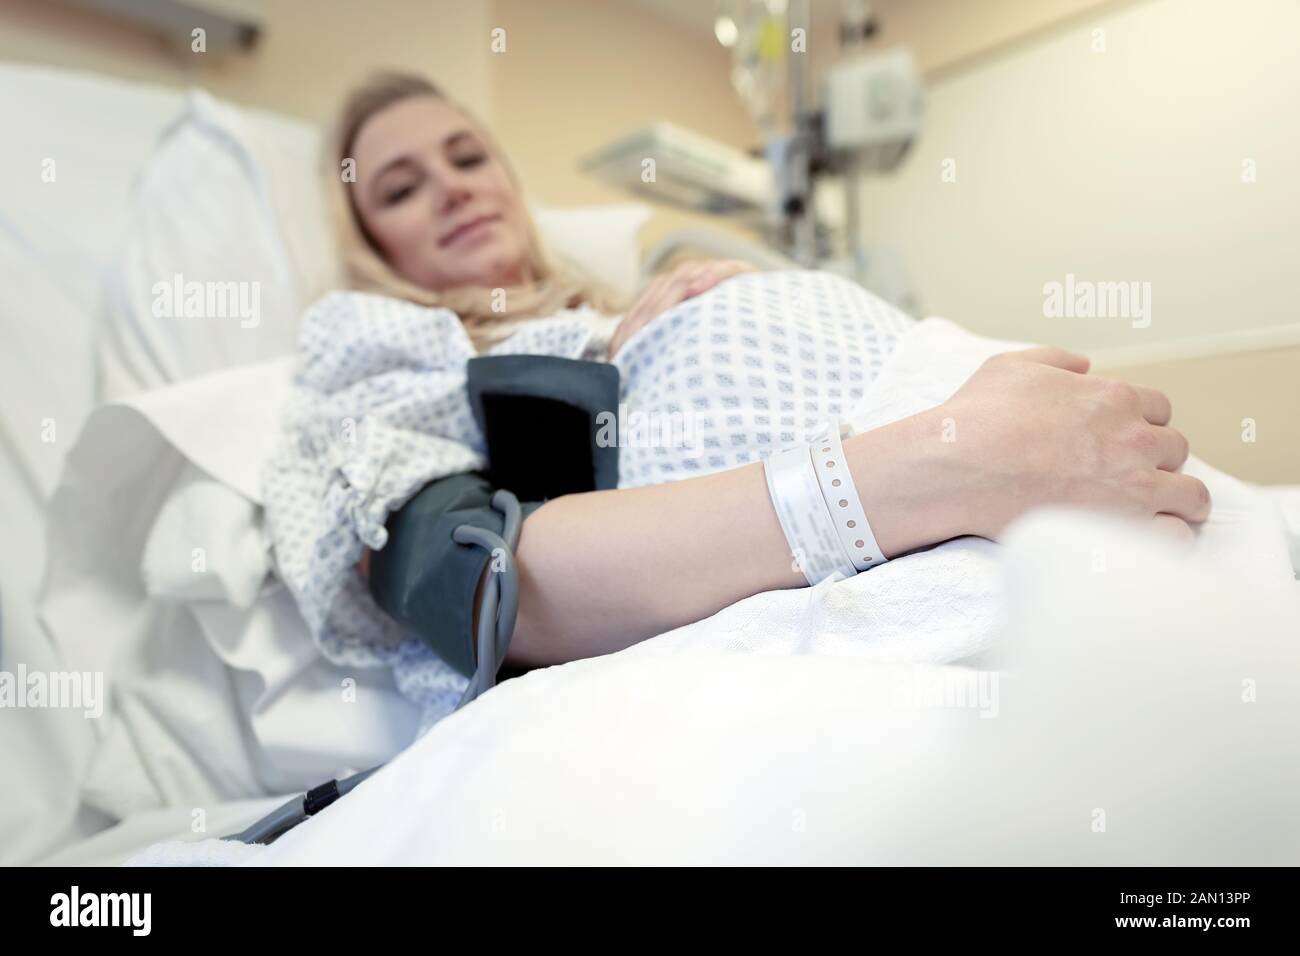 https://c8.alamy.com/comp/2AN13PP/pregnant-woman-in-the-hospital-measuring-a-blood-pressure-preparation-to-childbirth-healthy-pregnancy-concept-2AN13PP.jpg